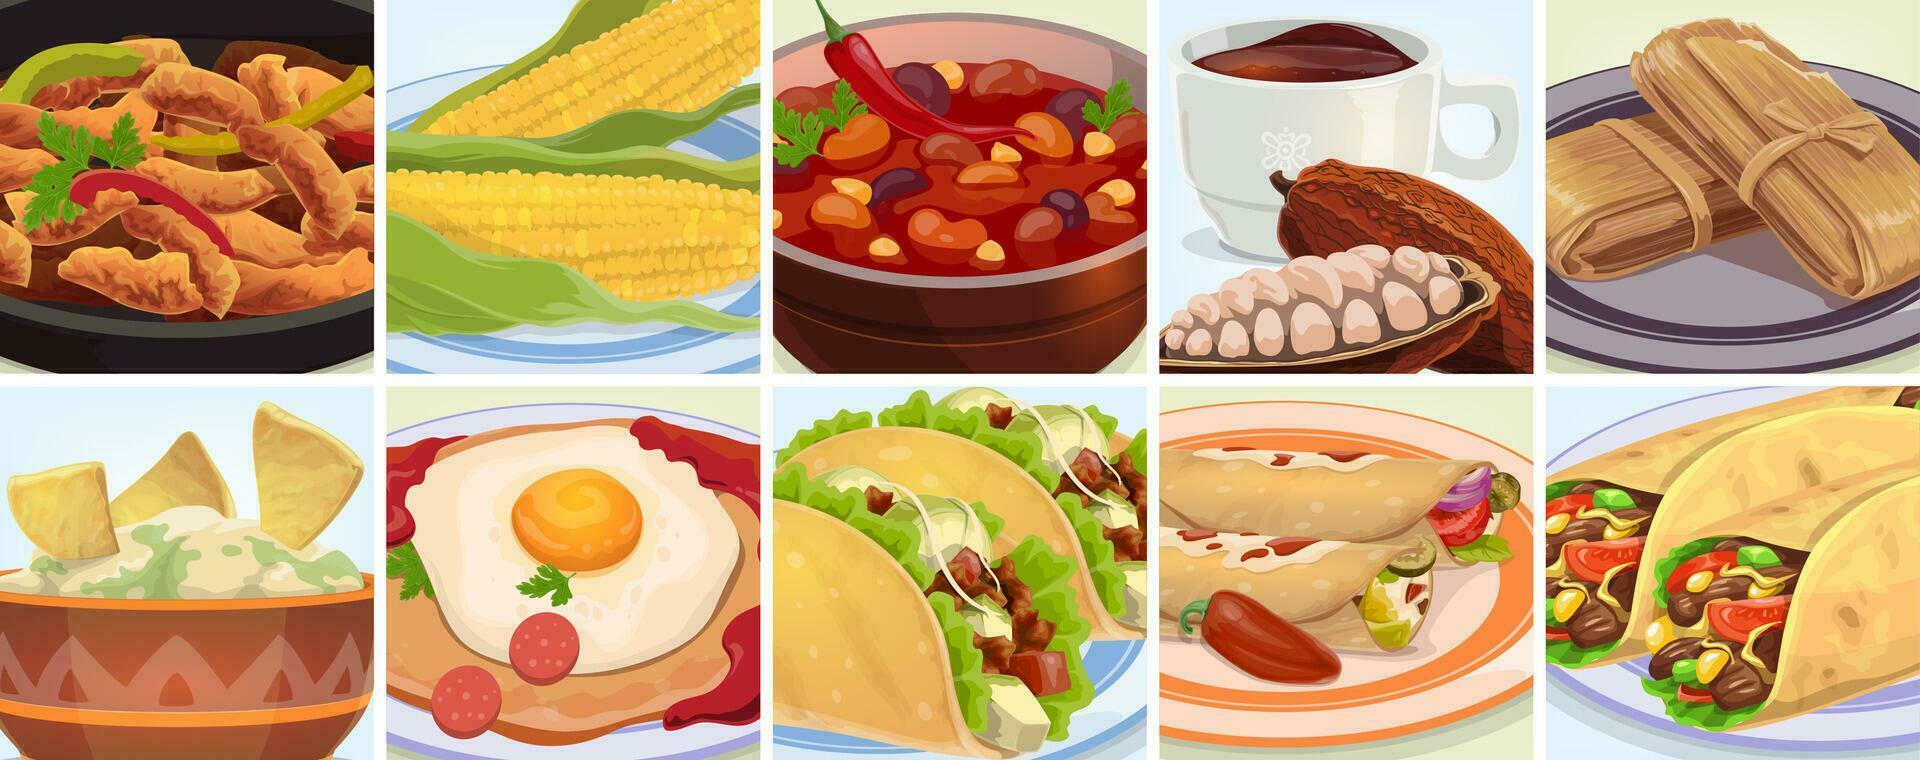 Tex mex mexican cuisine food and drink collage vector